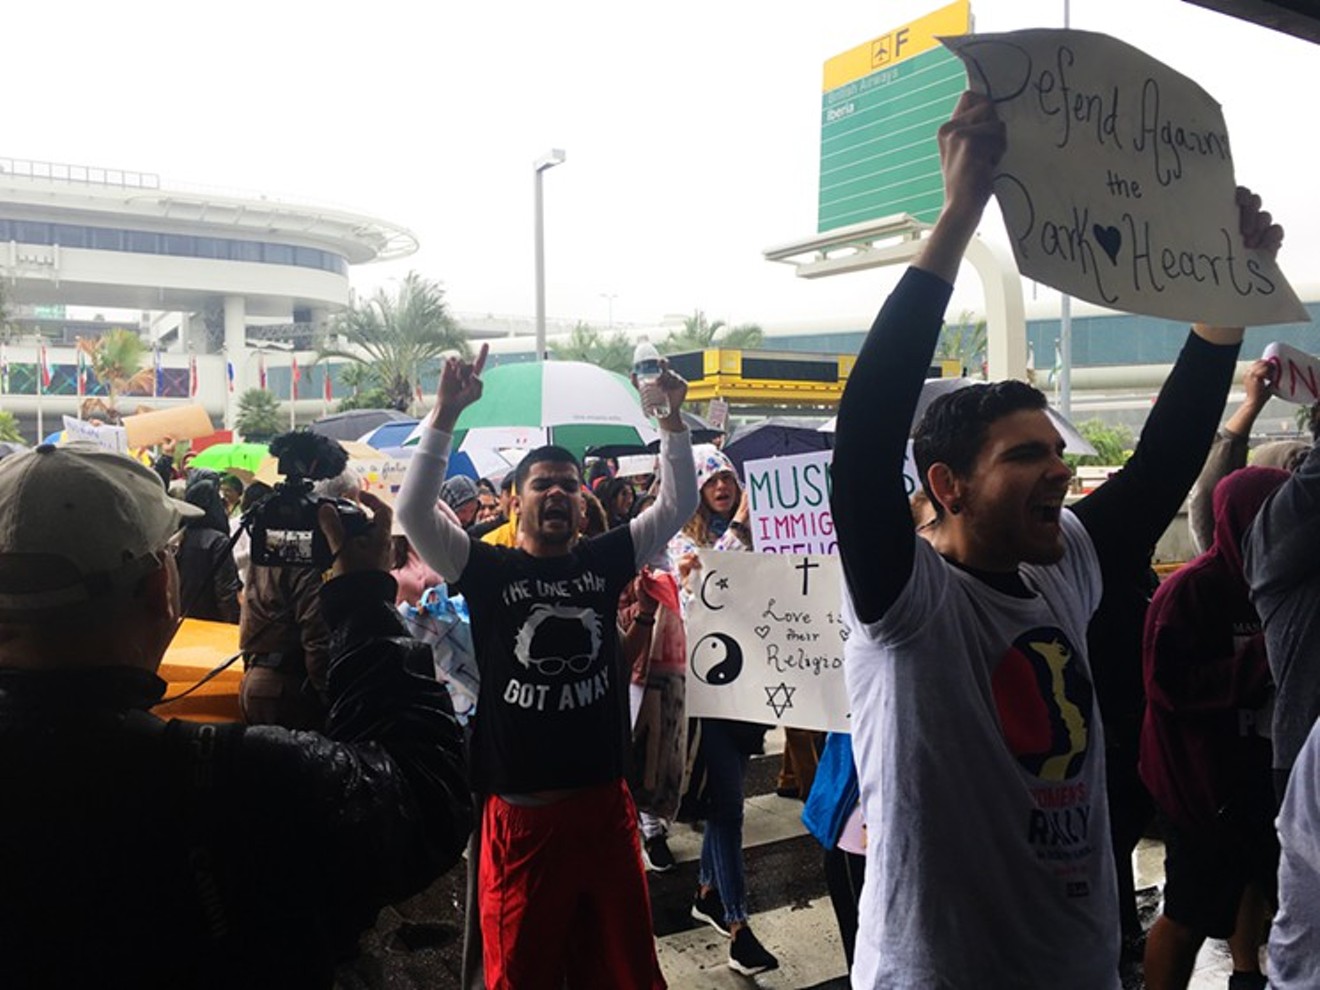 More than 200 people protested Trump's "Muslim ban" at MIA in January.